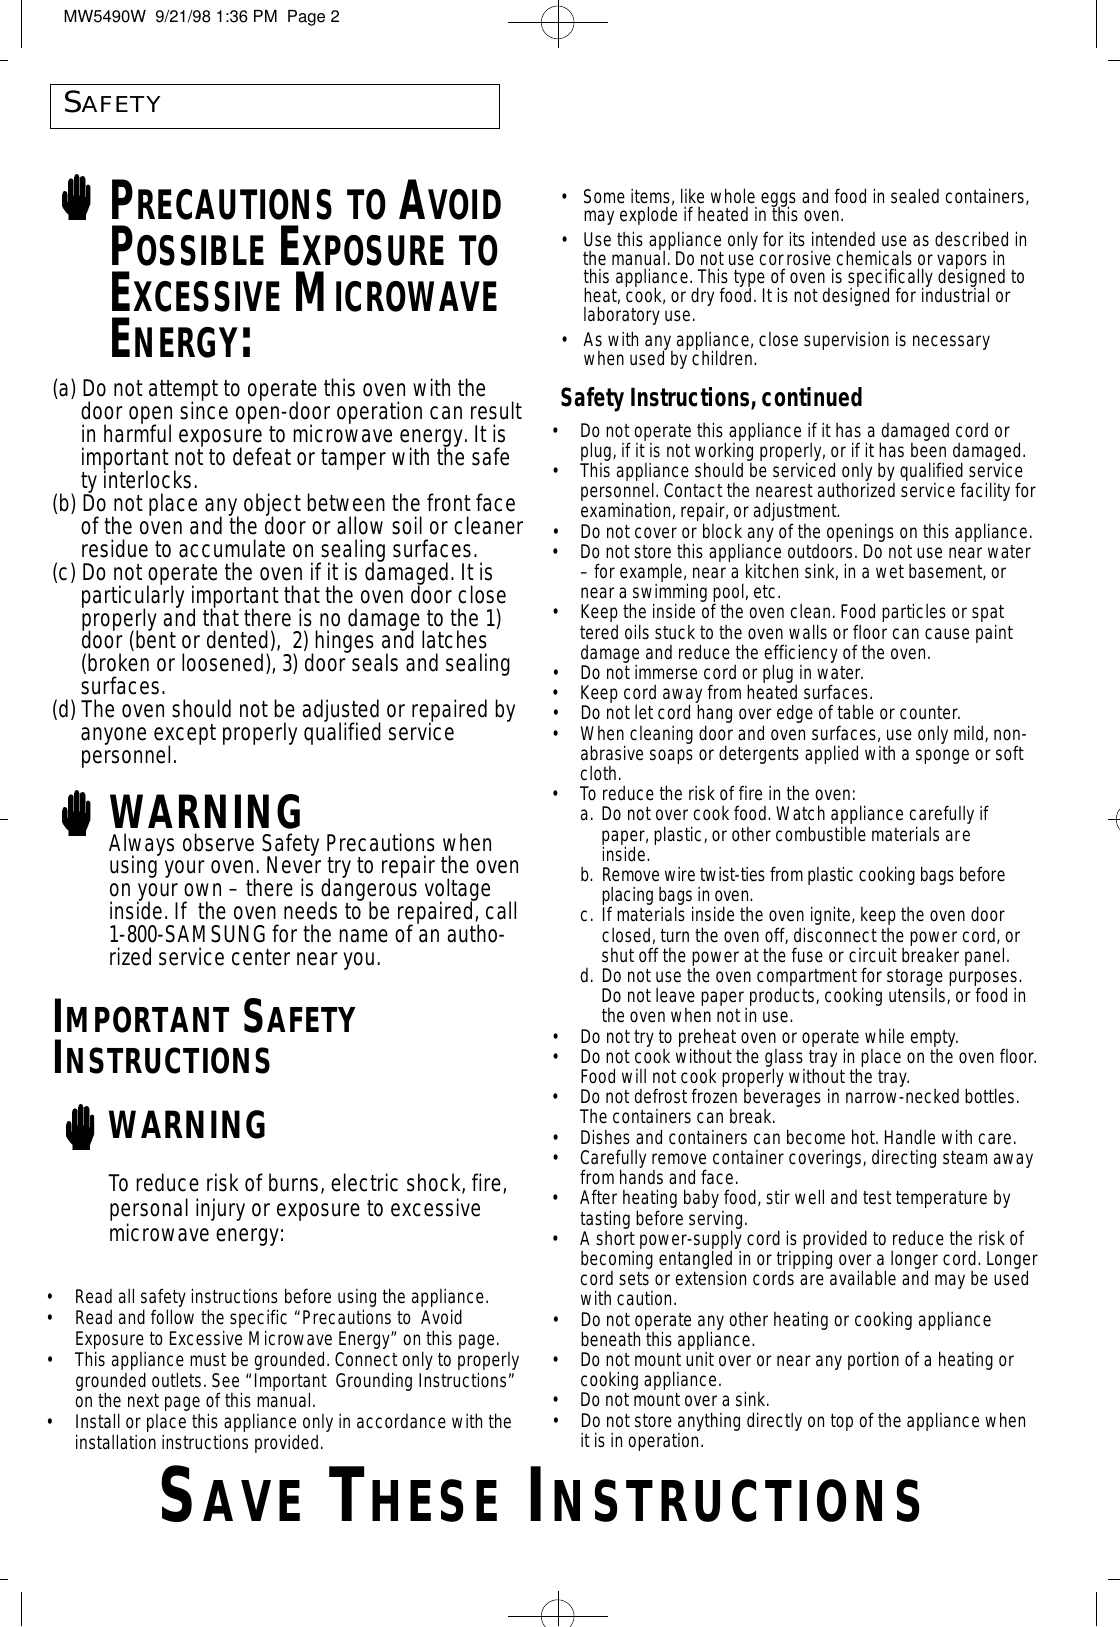 SAFETYPRECAUTIONS TO AVOIDPOSSIBLE EXPOSURE TOEXCESSIVE MICROWAVEENERGY:•Do not operate this appliance if it has a damaged cord or plug, if it is not working properly, or if it has been damaged.•This appliance should be serviced only by qualified service personnel. Contact the nearest authorized service facility forexamination, repair, or adjustment.•Do not cover or block any of the openings on this appliance.•Do not store this appliance outdoors. Do not use near water – for example, near a kitchen sink, in a wet basement, or near a swimming pool, etc. •Keep the inside of the oven clean. Food particles or spattered oils stuck to the oven walls or floor can cause paint damage and reduce the efficiency of the oven.•Do not immerse cord or plug in water.•Keep cord away from heated surfaces.•Do not let cord hang over edge of table or counter.•When cleaning door and oven surfaces, use only mild, non-abrasive soaps or detergents applied with a sponge or soft cloth.• To reduce the risk of fire in the oven:a. Do not over cook food. Watch appliance carefully if paper, plastic, or other combustible materials areinside.b . Remove wire twist-ties from plastic cooking bags before placing bags in oven.c. If materials inside the oven ignite, keep the oven door closed, turn the oven off, disconnect the power cord, or shut off the power at the fuse or circuit breaker panel.d. Do not use the oven compartment for storage purposes. Do not leave paper products, cooking utensils, or food in the oven when not in use.•Do not try to preheat oven or operate while empty.•Do not cook without the glass tray in place on the oven floor.Food will not cook properly without the tray.•Do not defrost frozen beverages in narrow-necked bottles. The containers can break.•Dishes and containers can become hot. Handle with care.•Carefully remove container coverings, directing steam awayfrom hands and face.•After heating baby food, stir well and test temperature by tasting before serving.•A short power-supply cord is provided to reduce the risk of becoming entangled in or tripping over a longer cord. Longercord sets or extension cords are available and may be used with caution.  •Do not operate any other heating or cooking appliance beneath this appliance.•Do not mount unit over or near any portion of a heating or cooking appliance.• Do not mount over a sink.•Do not store anything directly on top of the appliance when it is in operation.(a) Do not attempt to operate this oven with the door open since open-door operation can resultin harmful exposure to microwave energy. It is important not to defeat or tamper with the safety interlocks.(b) Do not place any object between the front face of the oven and the door or allow soil or cleanerresidue to accumulate on sealing surfaces.(c) Do not operate the oven if it is damaged. It is particularly important that the oven door close properly and that there is no damage to the 1) door (bent or dented),  2) hinges and latches (broken or loosened), 3) door seals and sealing surfaces.(d) The oven should not be adjusted or repaired by anyone except properly qualified service personnel.WARNINGAlways observe Safety Precautions whenusing your oven. Never try to repair the ovenon your own – there is dangerous voltageinside. If  the oven needs to be repaired, call1-800-SAMSUNG for the name of an autho-rized service center near you.IMPORTANT SAFETYINSTRUCTIONSWARNING•Some items, like whole eggs and food in sealed containers,may explode if heated in this oven.•Use this appliance only for its intended use as described inthe manual. Do not use corrosive chemicals or vapors inthis appliance. This type of oven is specifically designed toheat, cook, or dry food. It is not designed for industrial orlaboratory use.•As with any appliance, close supervision is necessarywhen used by children.Safety Instructions, continuedTo reduce risk of burns, electric shock, fire,personal injury or exposure to excessivemicrowave energy:•Read all safety instructions before using the appliance.•Read and follow the specific “Precautions to  Avoid Exposure to Excessive Microwave Energy” on this page.•This appliance must be grounded. Connect only to properlygrounded outlets. See “Important  Grounding Instructions”on the next page of this manual.  •Install or place this appliance only in accordance with the installation instructions provided.SA V E TH E S E IN S T R U C T I O N SMW5490W  9/21/98 1:36 PM  Page 2